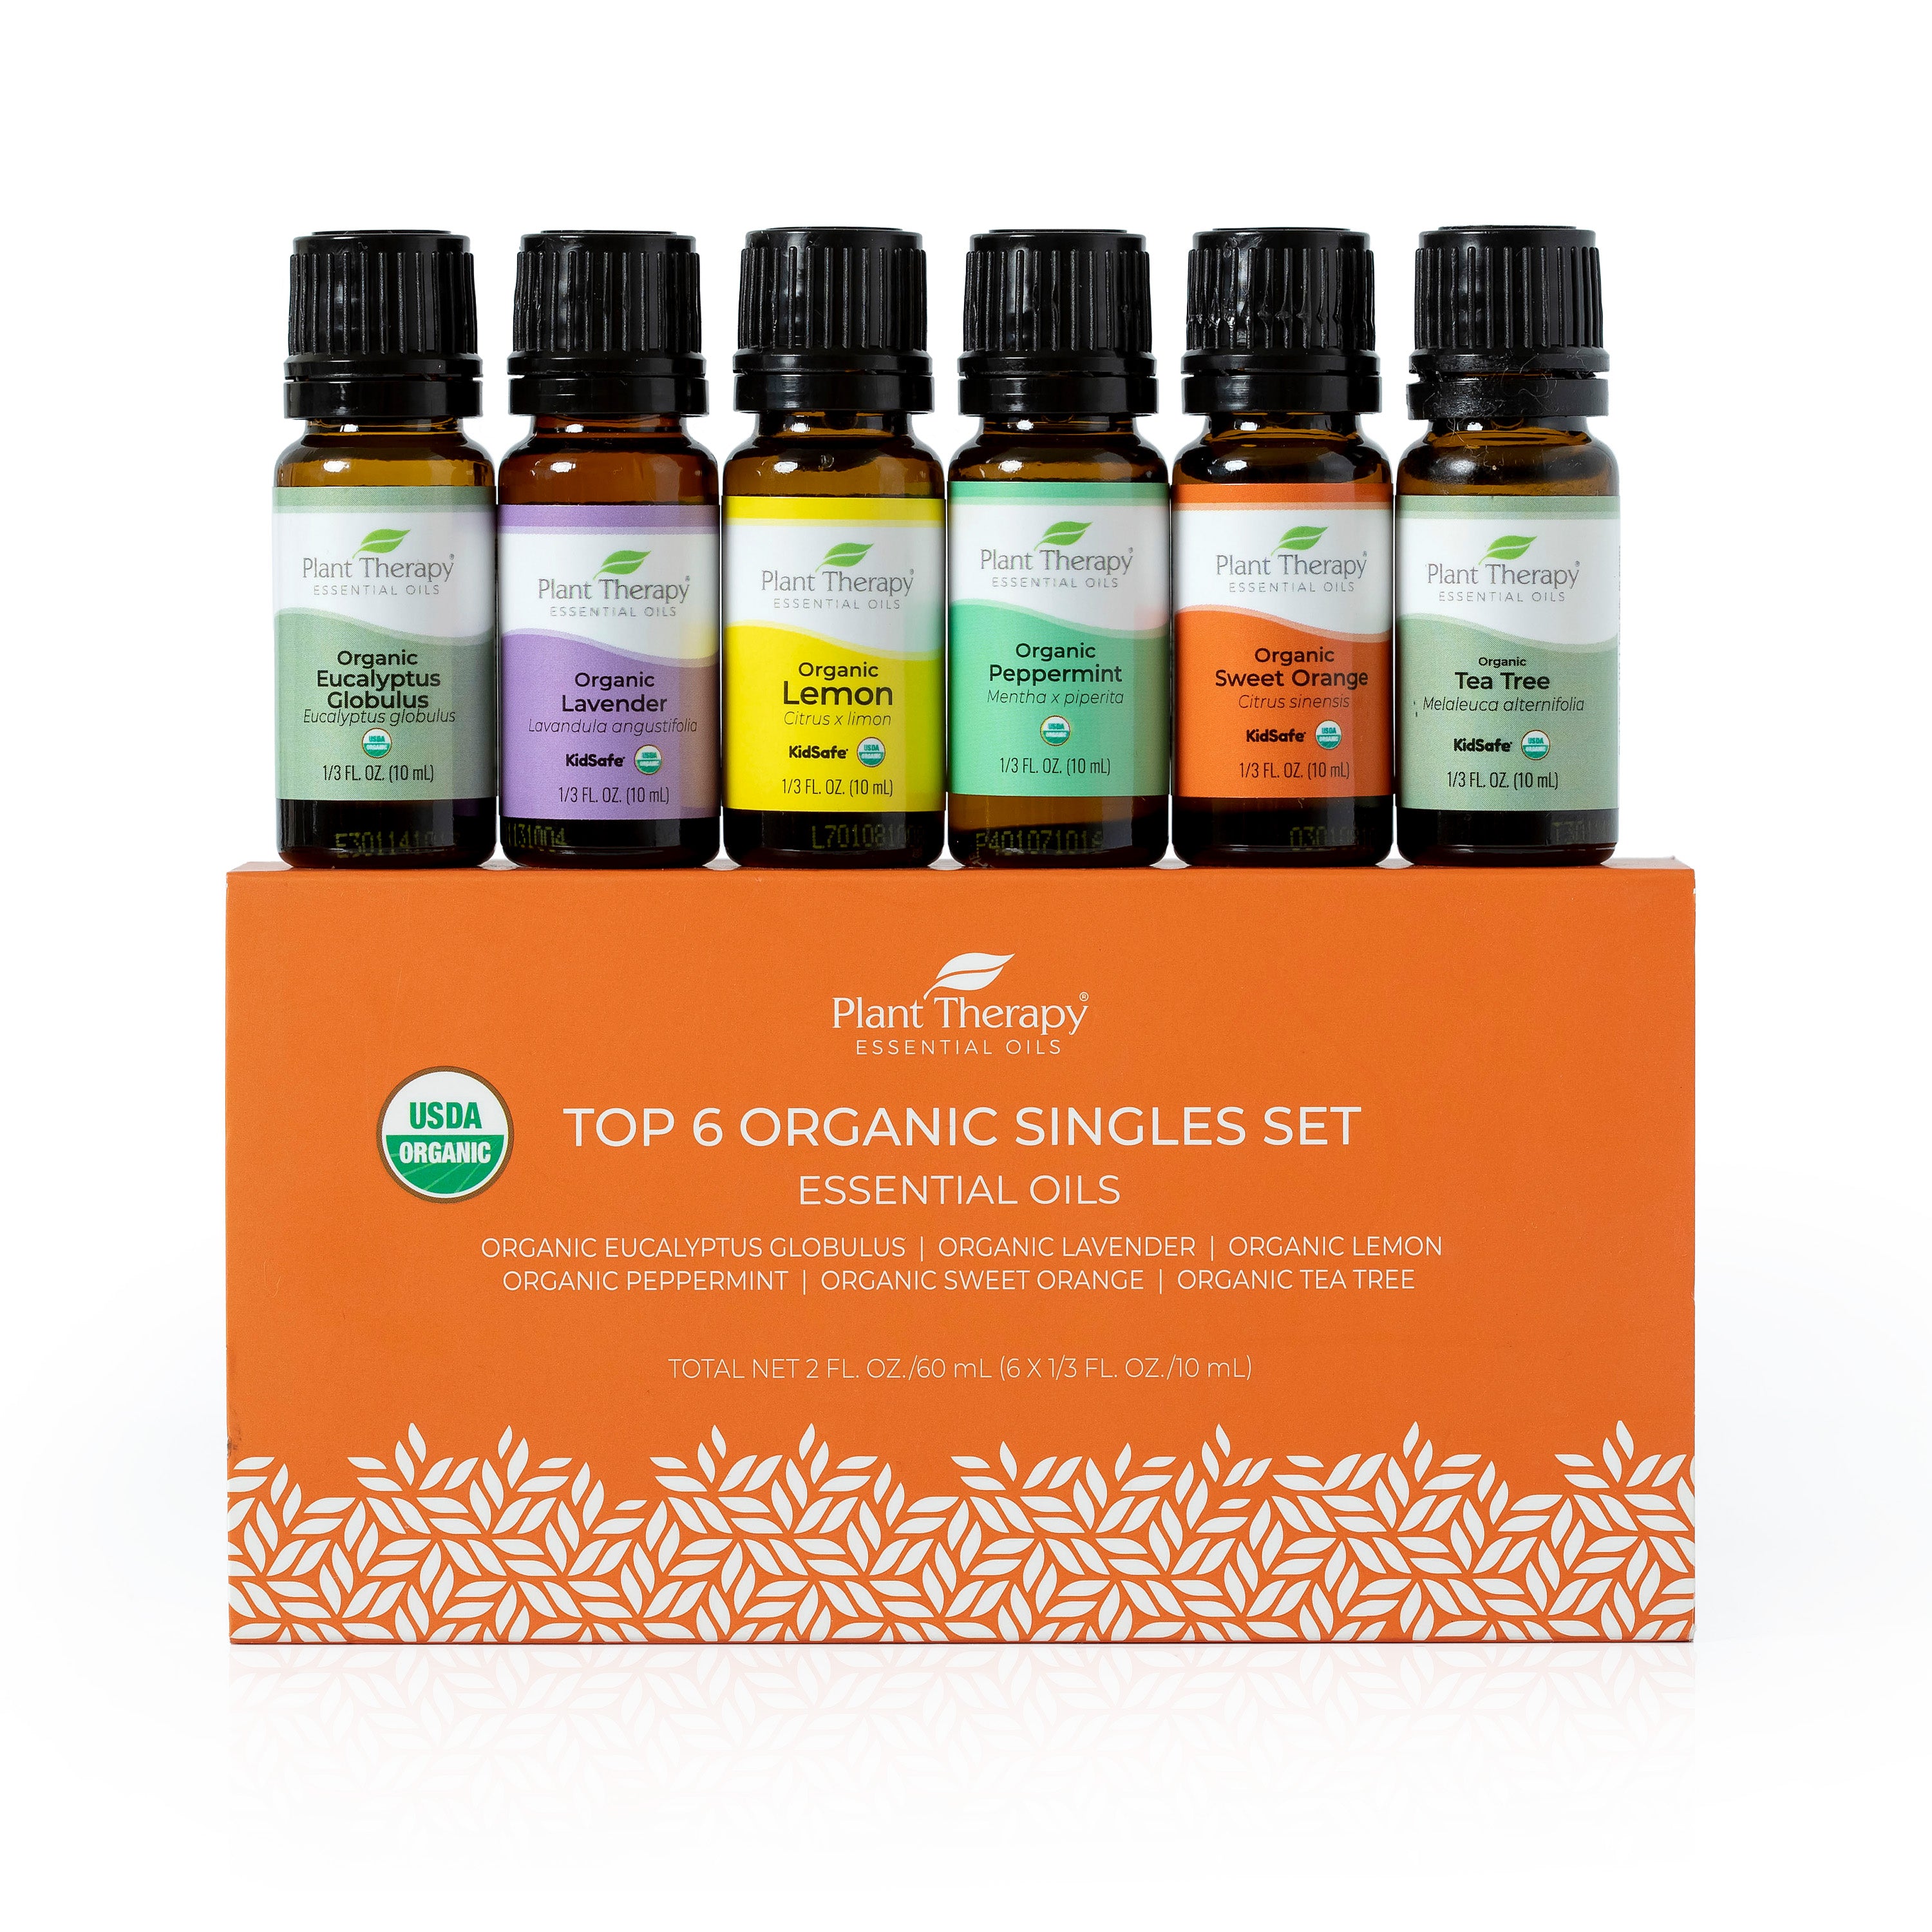 Floral essential oils can be used alone or in combination with